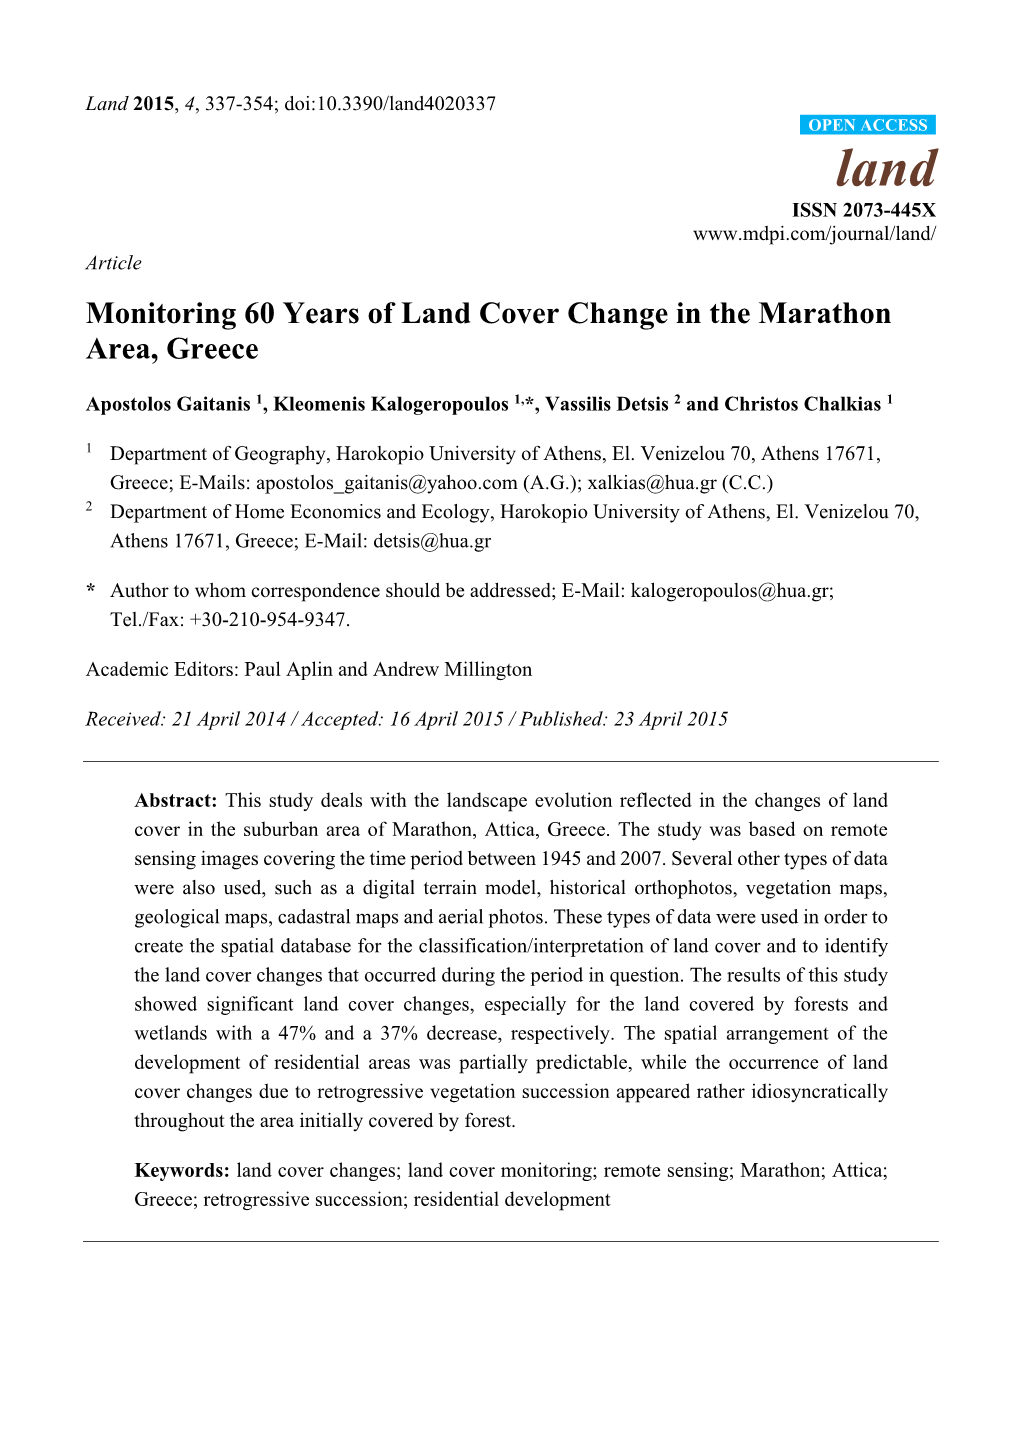 Monitoring 60 Years of Land Cover Change in the Marathon Area, Greece